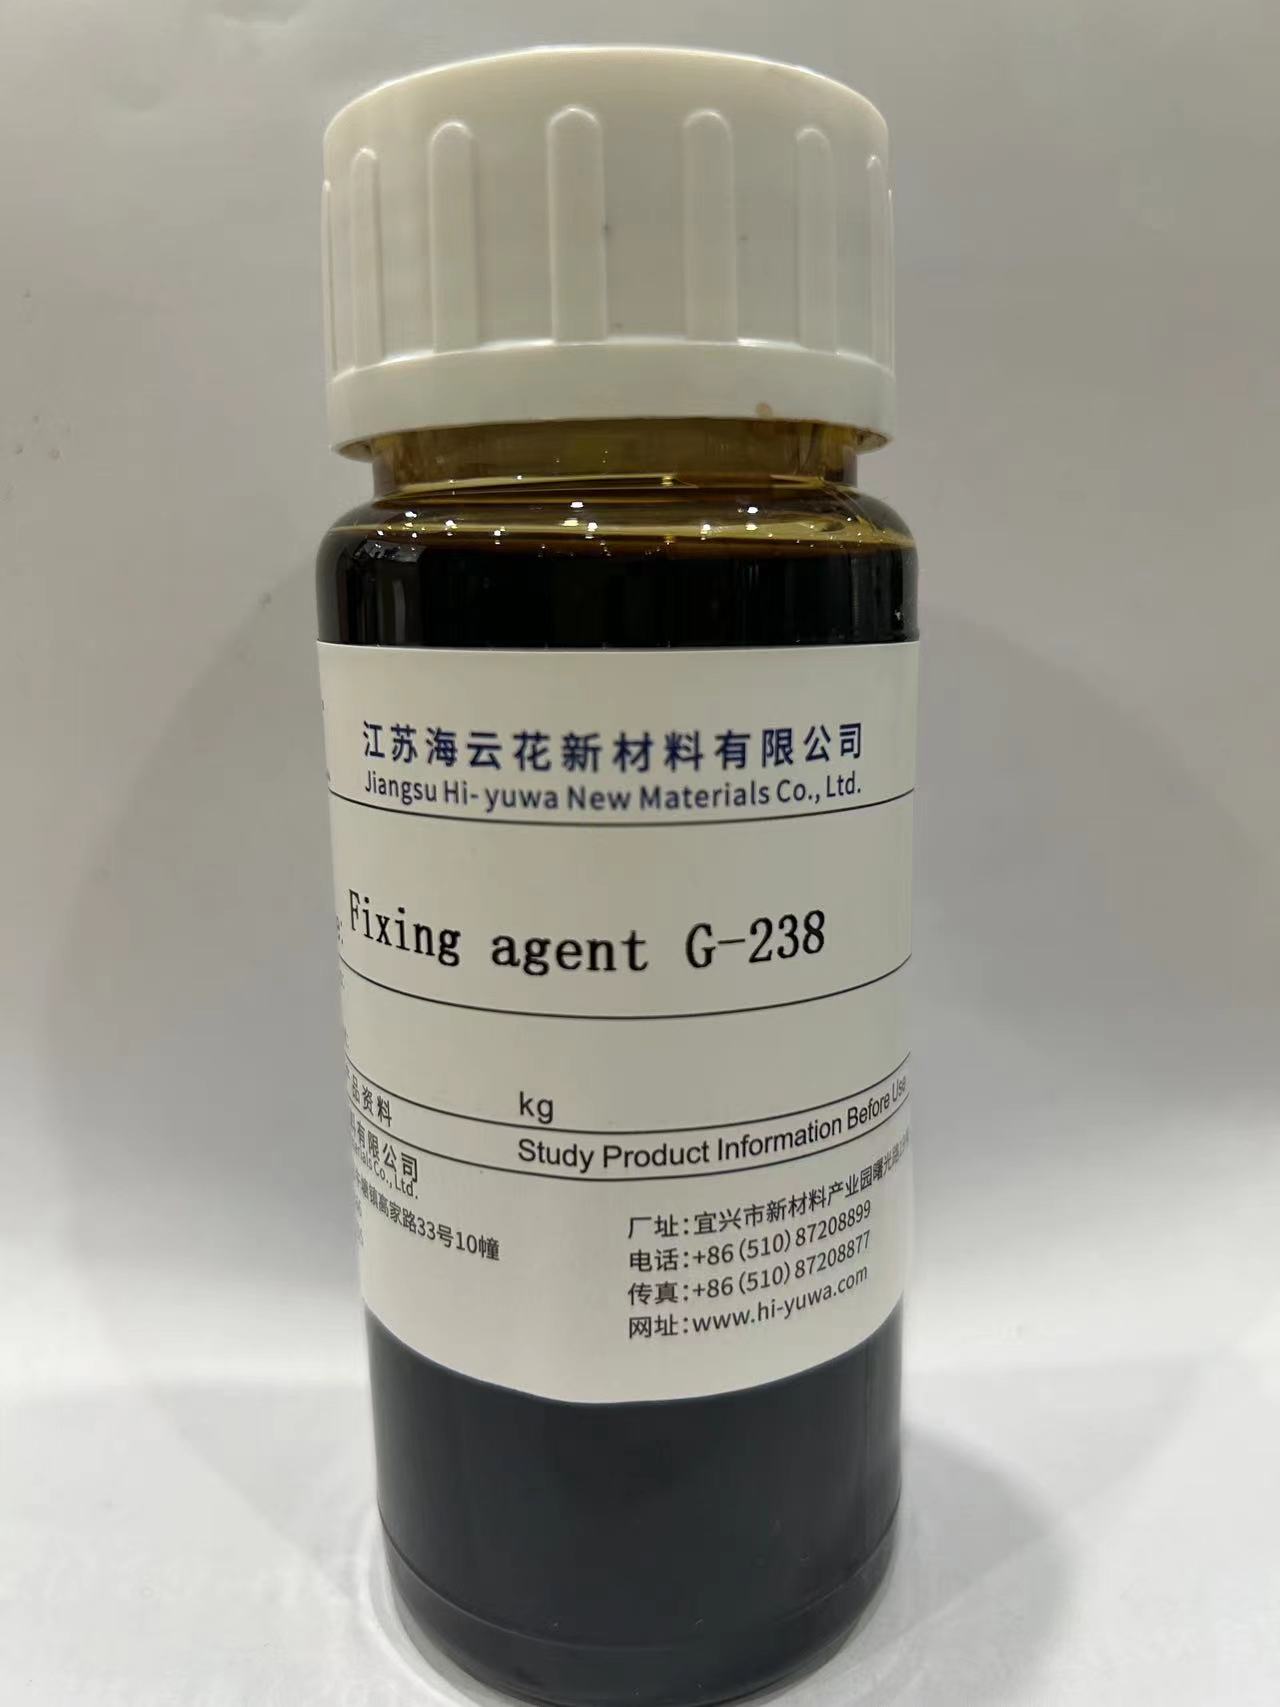 Fixing agent G-238 for acid dyes